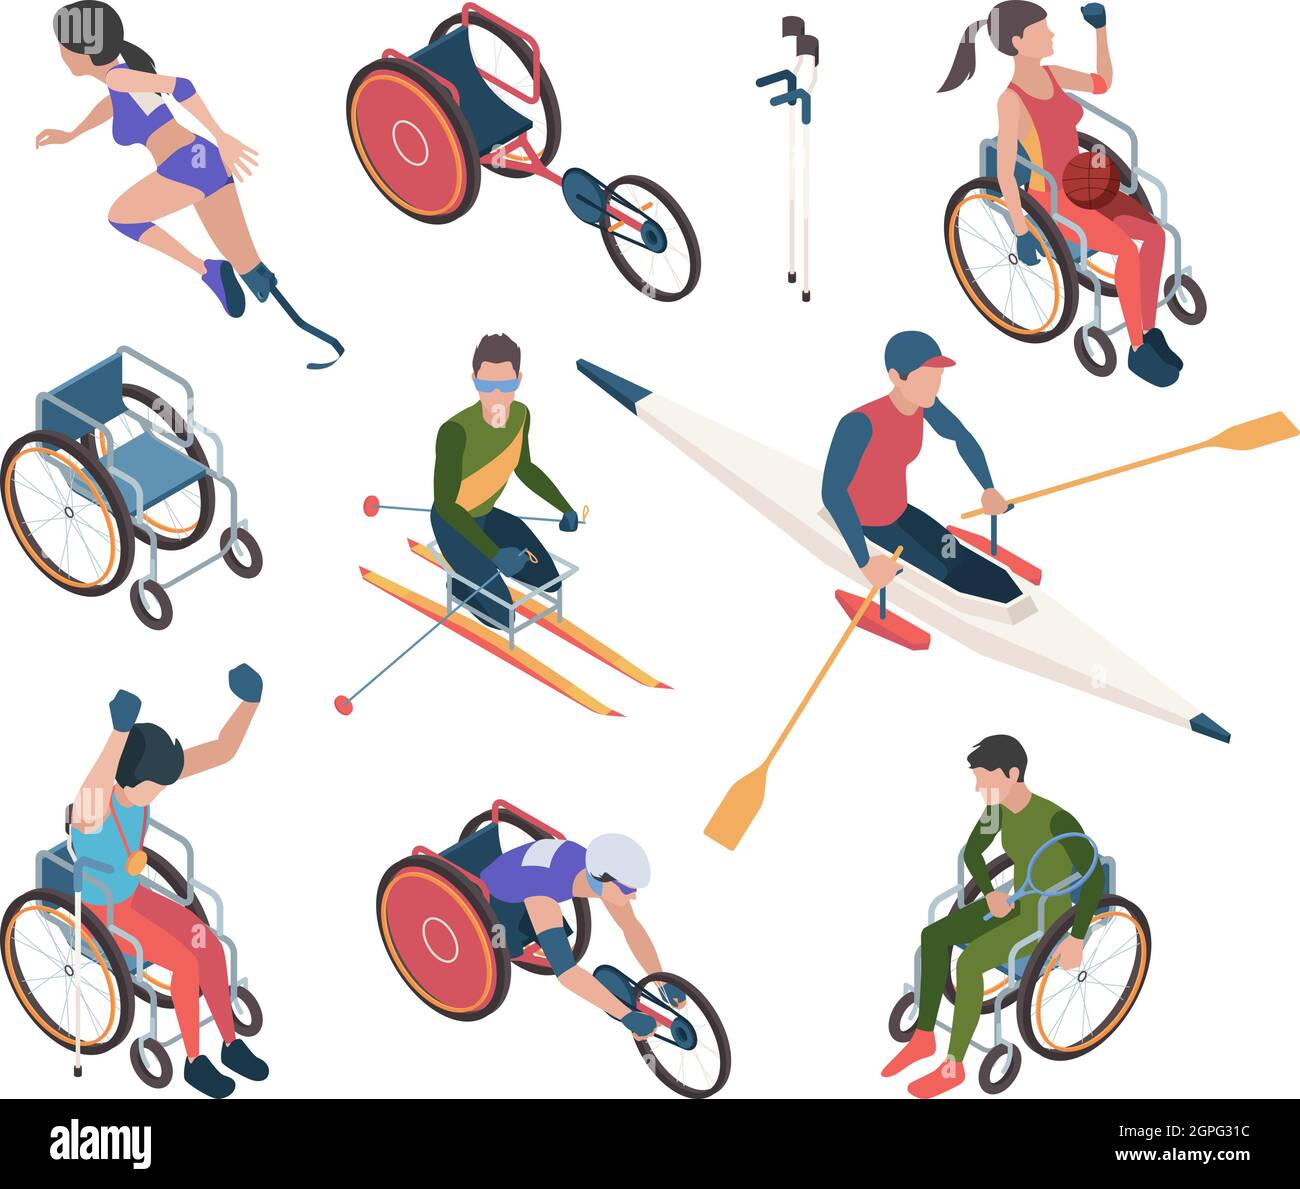 Paralympic games. Athletic disability persons in olympic sport celebration vector isometric characters Stock Vector